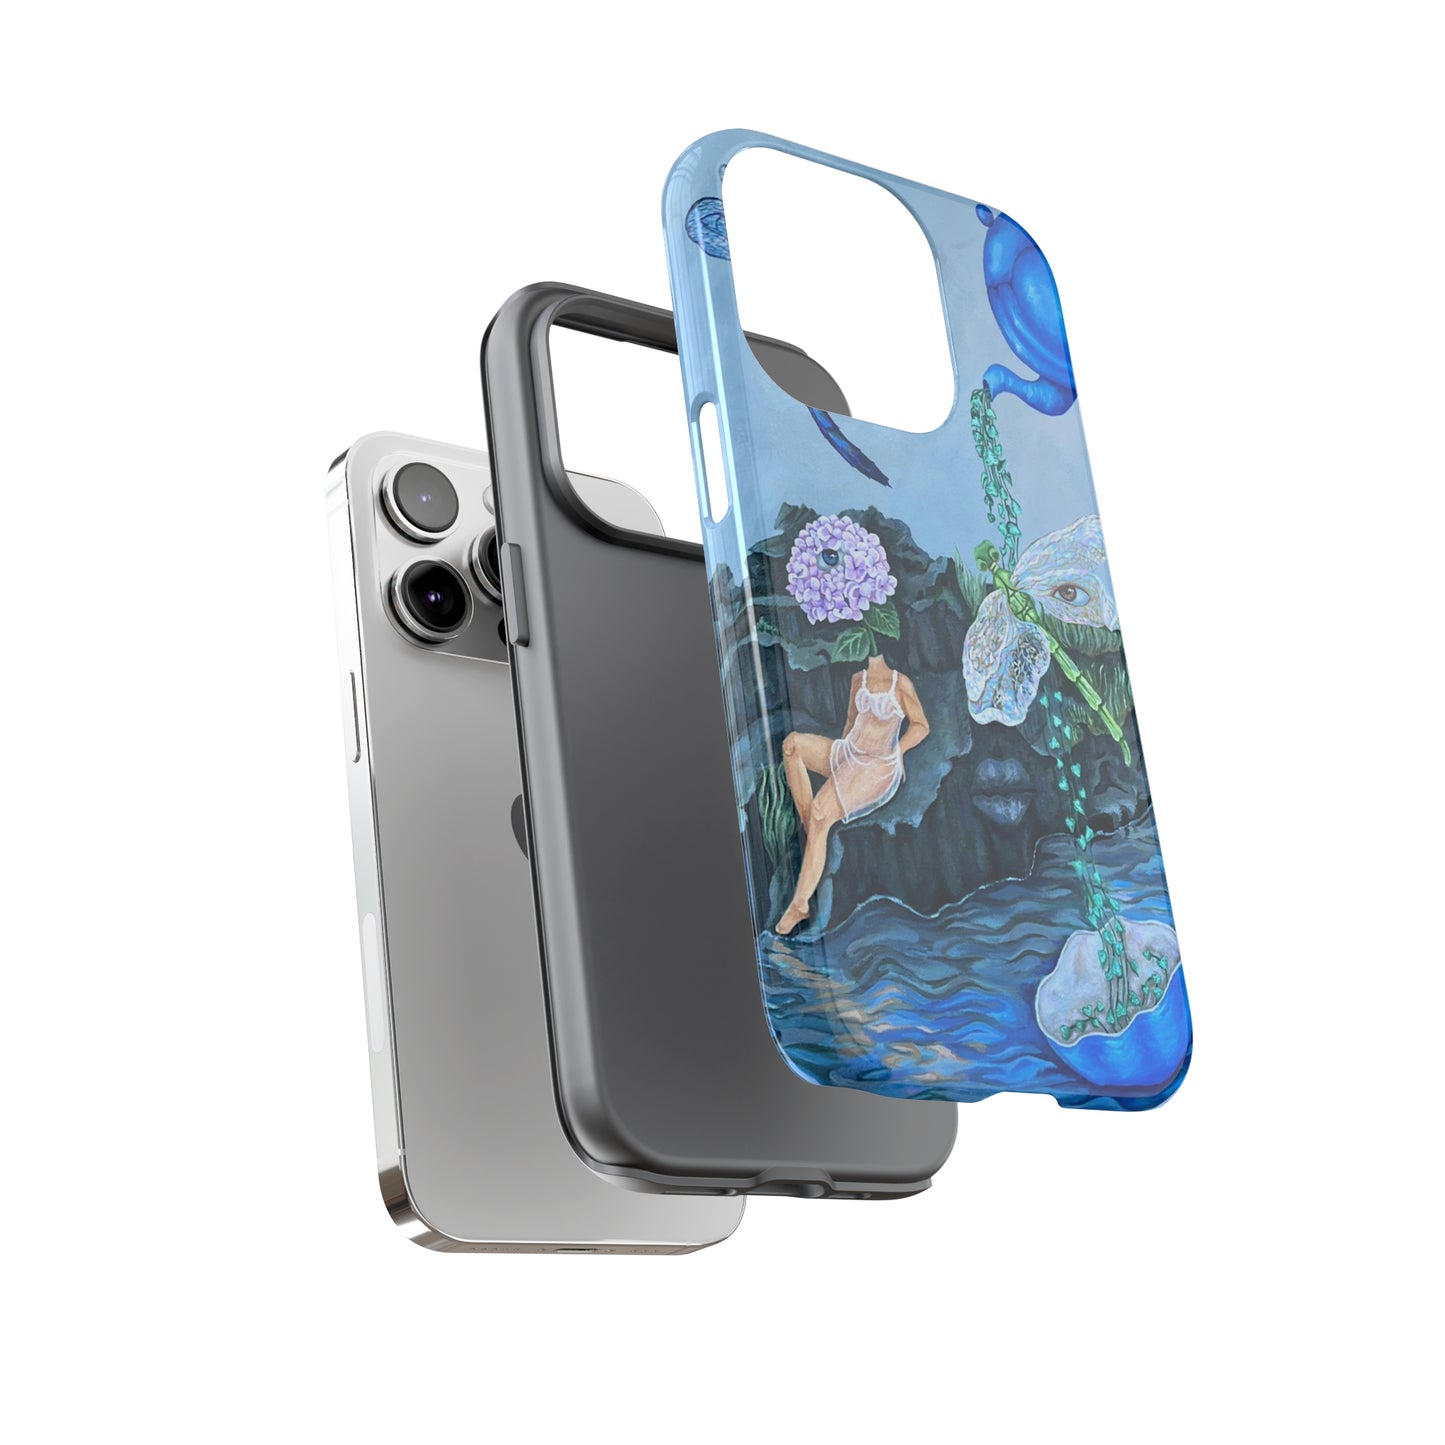 "Looking for a Place to Heal" Phone Case